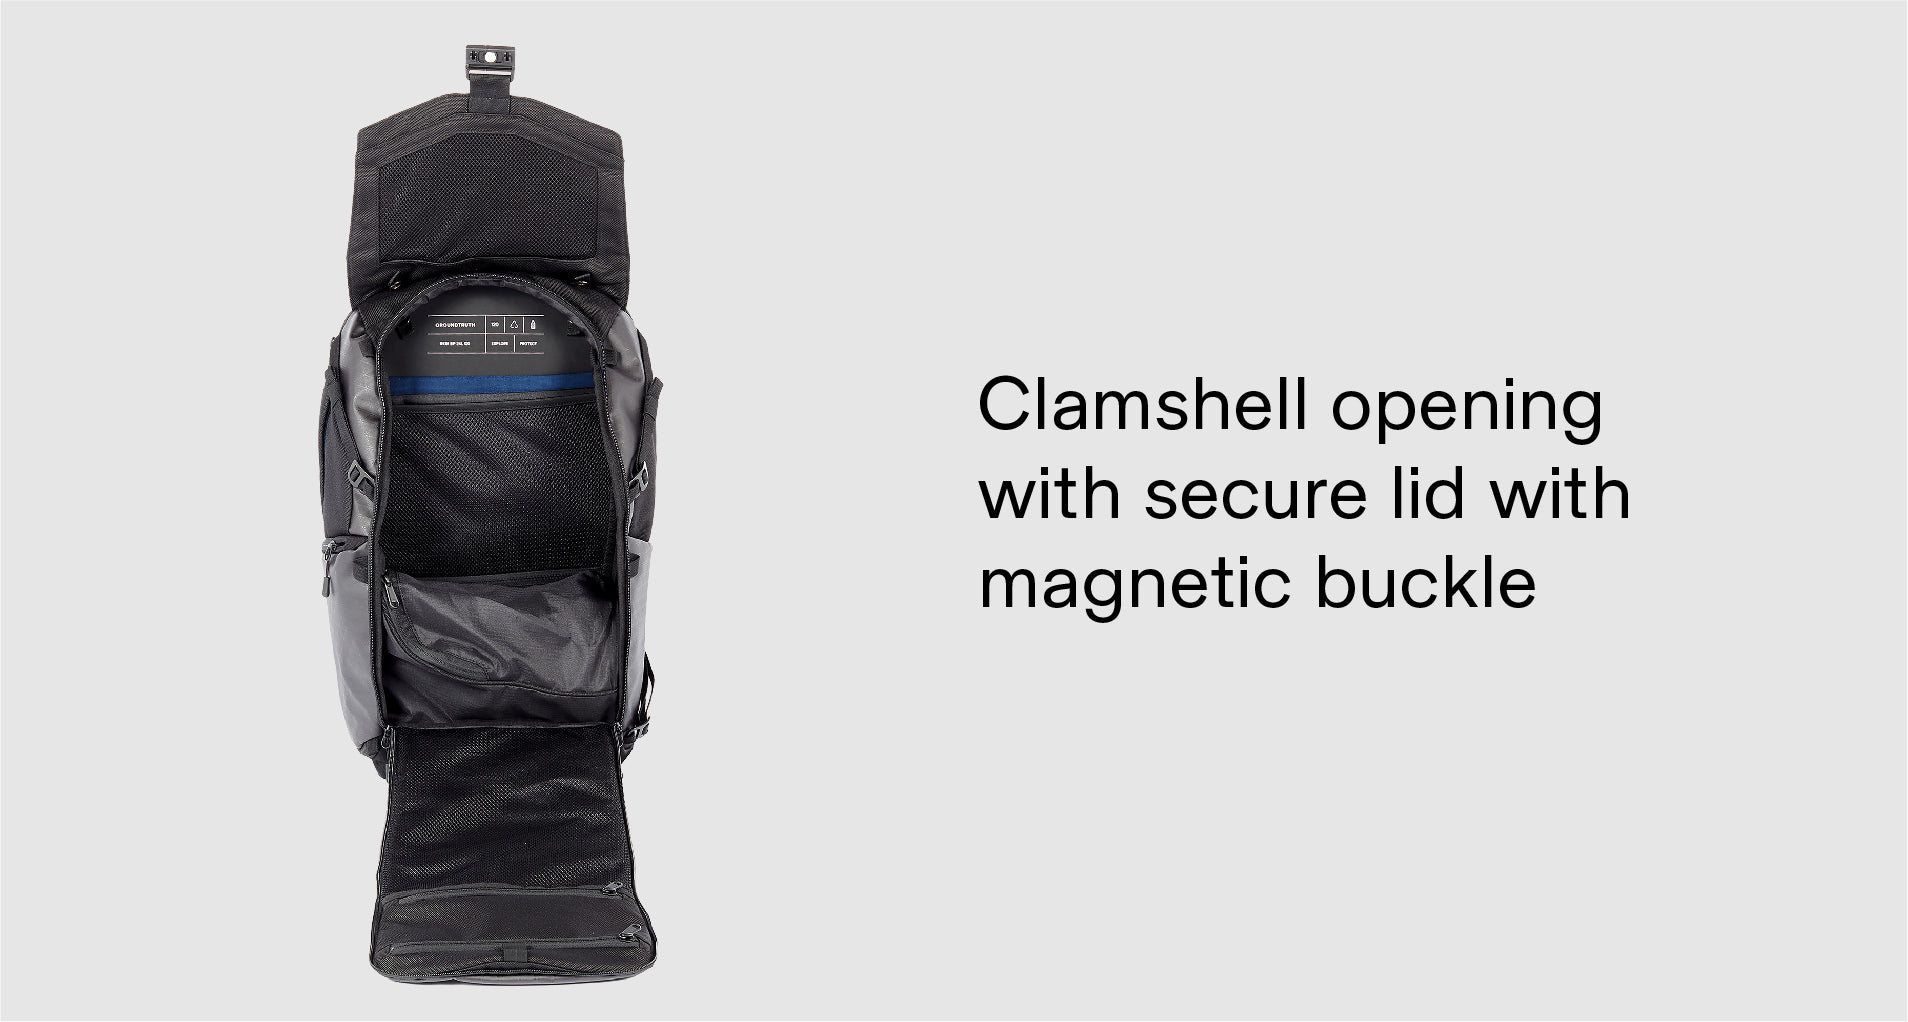 Groundtruth Backpack's Clamshell opining  